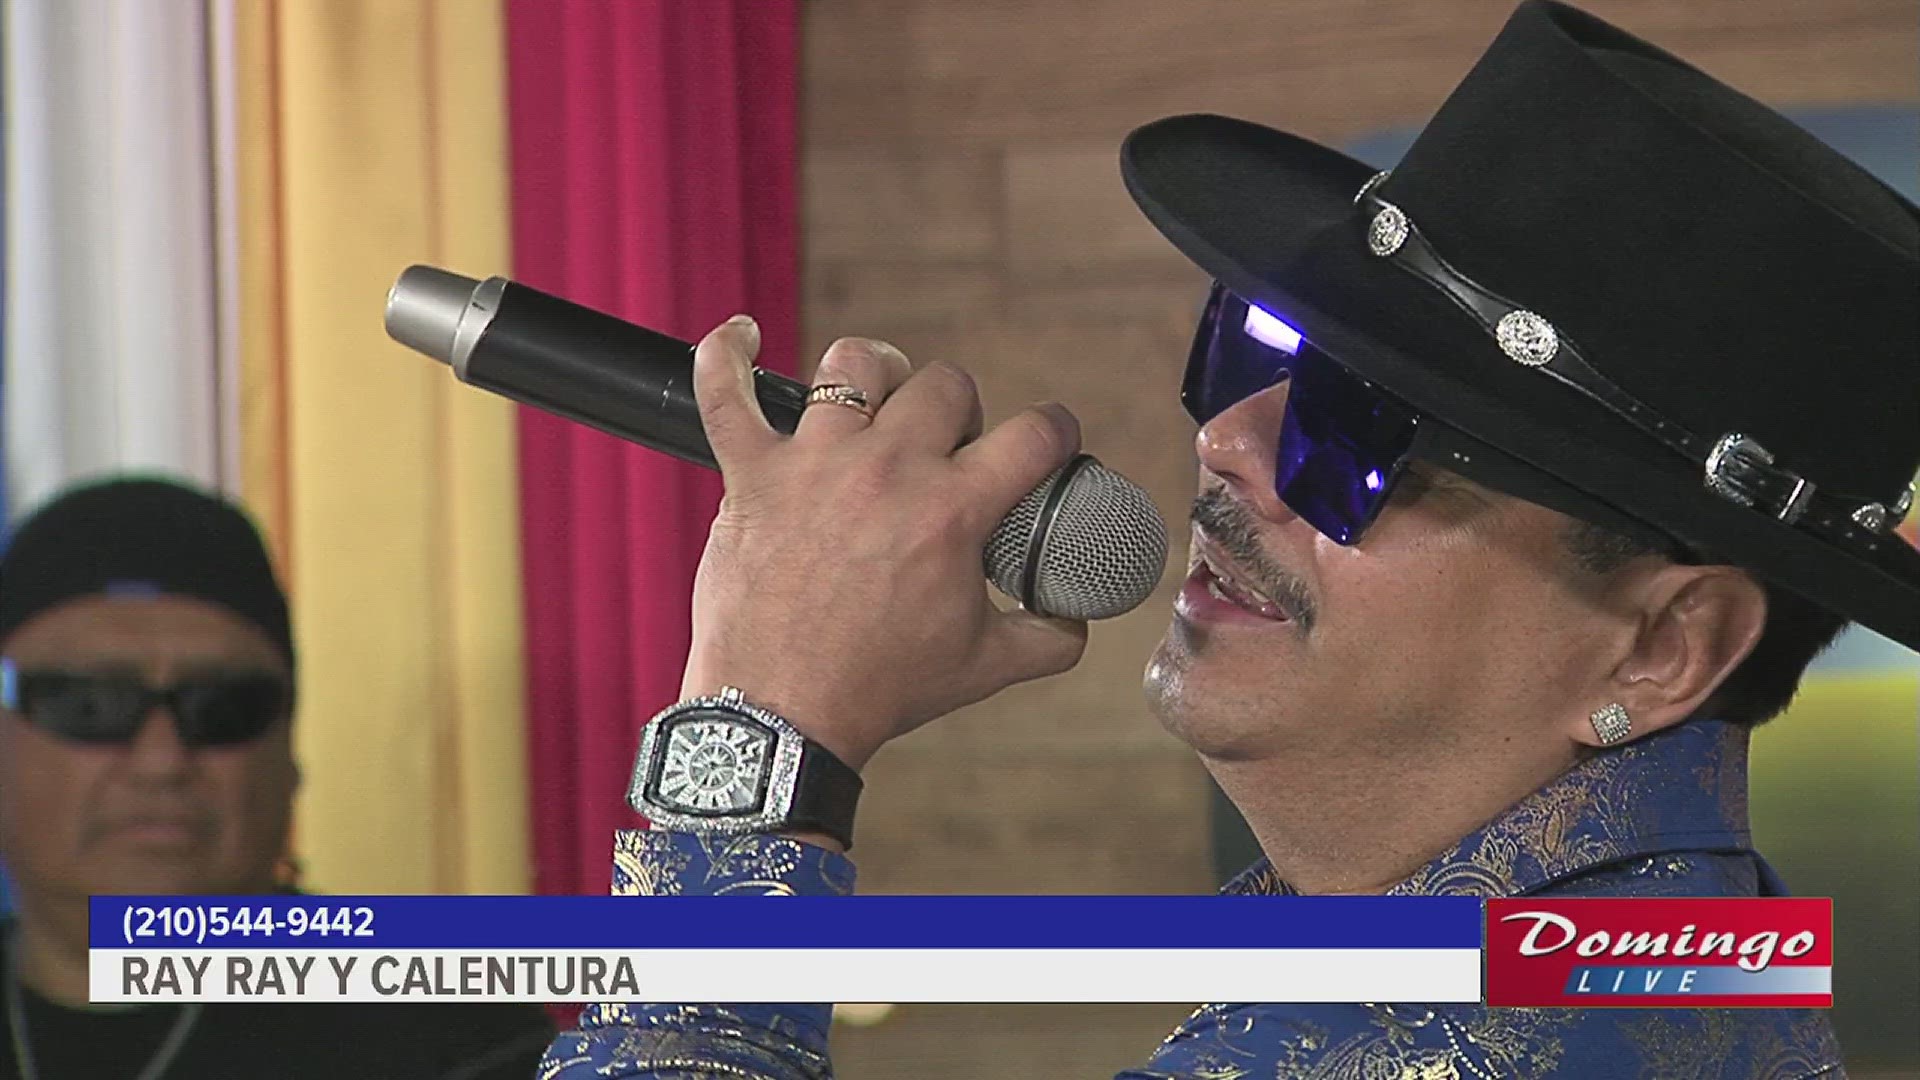 Ray Ray joined us on Domingo Live to perform his cover of Los Relampagos del Norte's "Mujer de Cabaret."